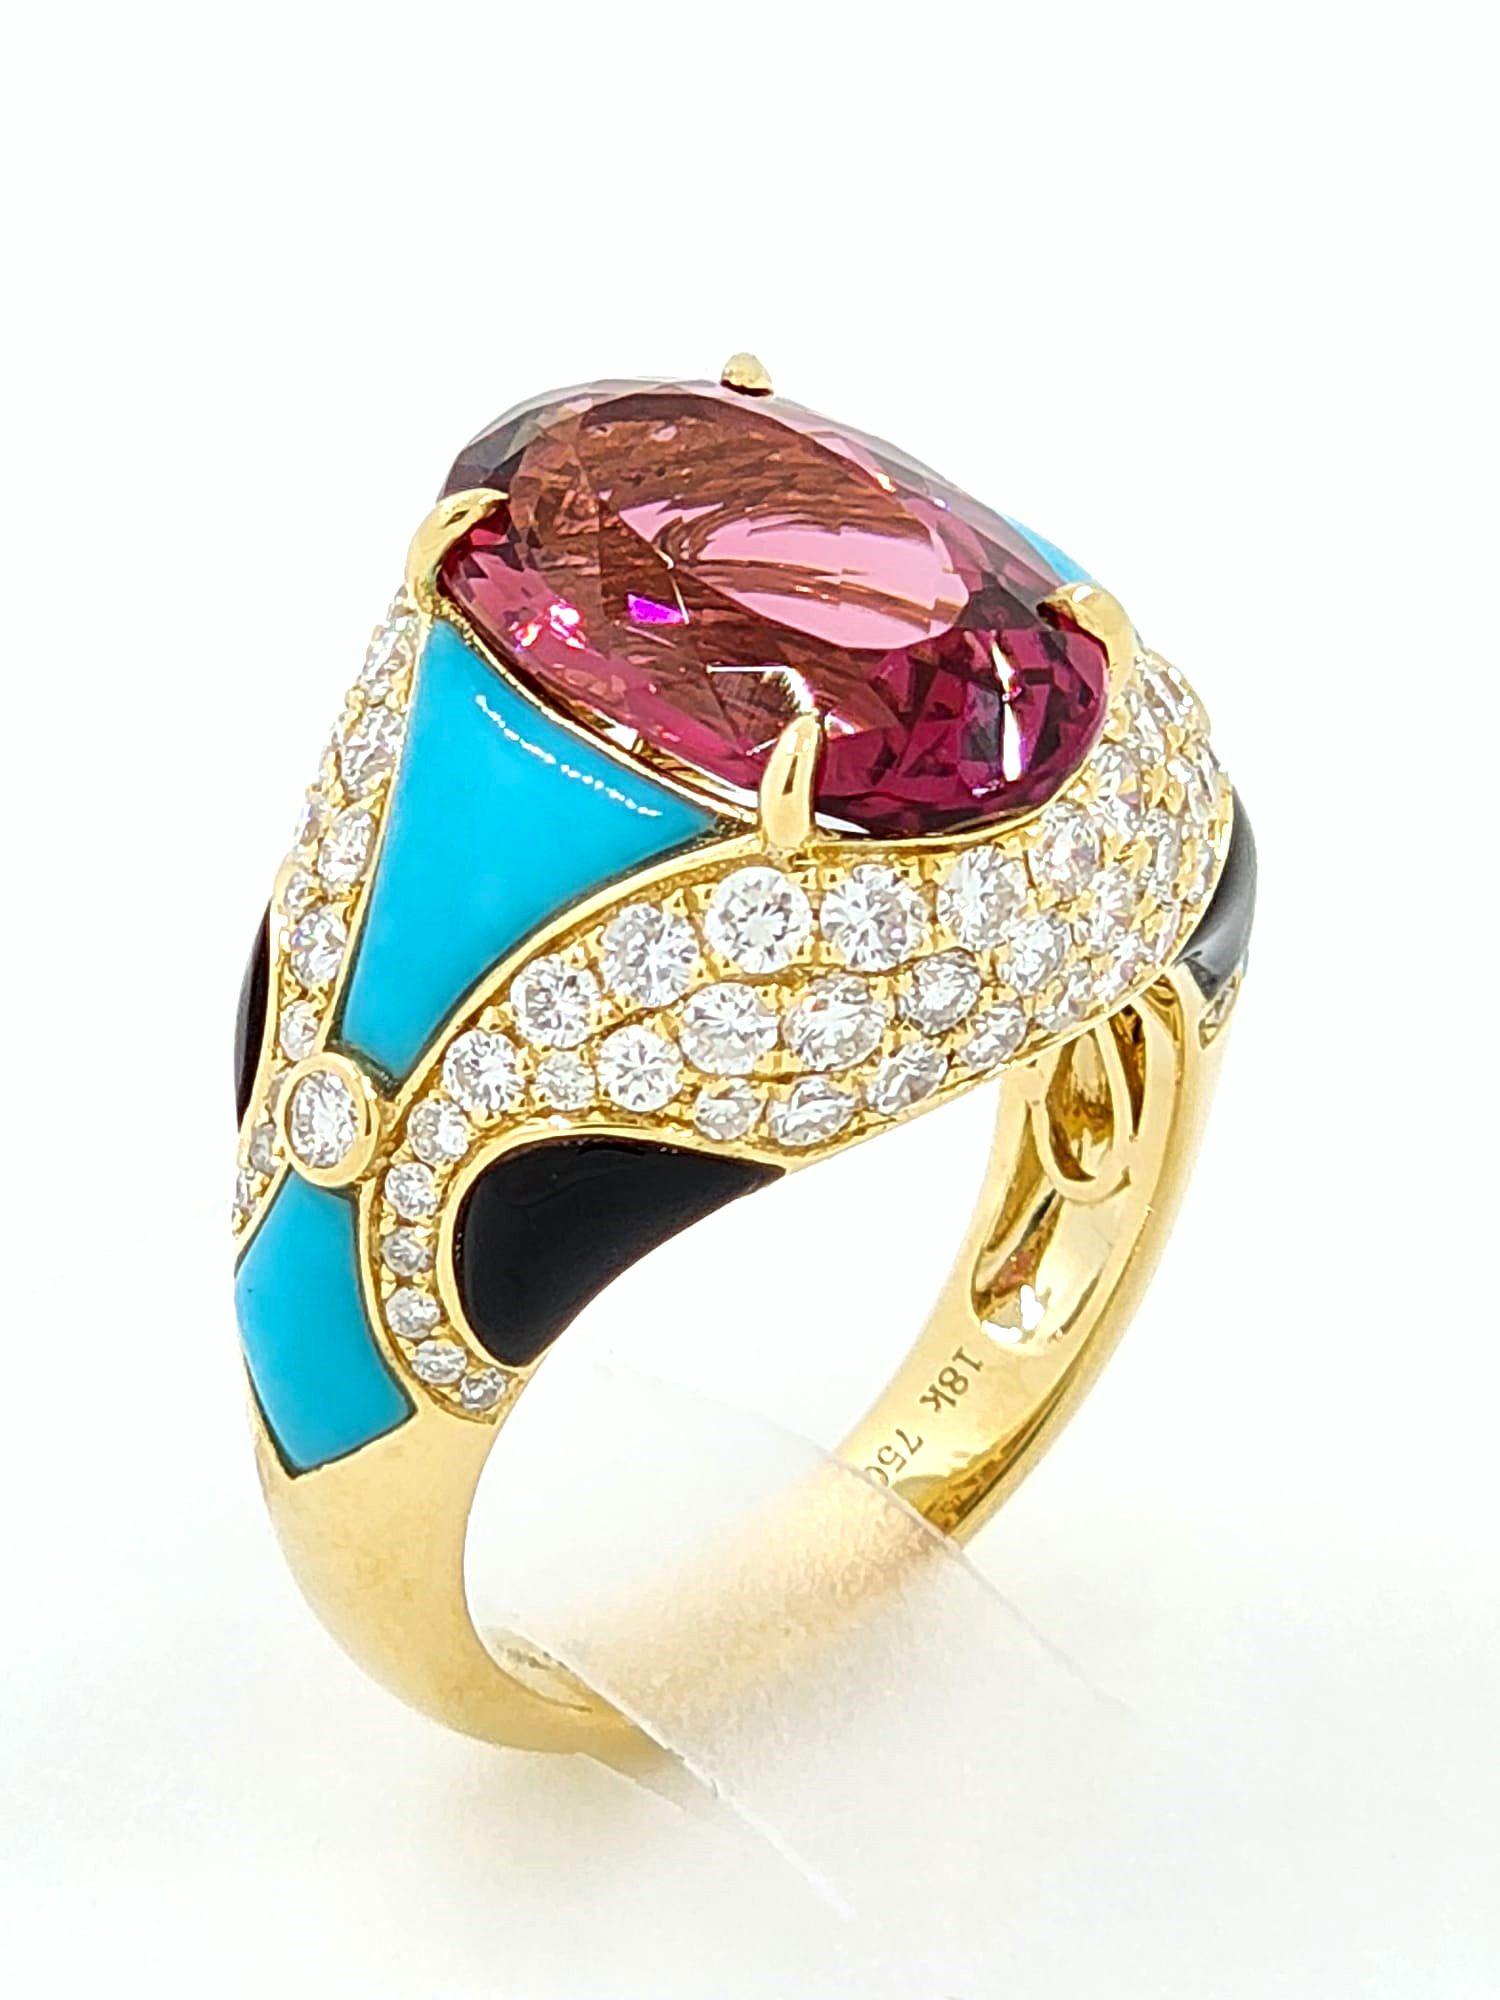 Art Deco Rubellite Turquoise Onyx Diamond Cocktail Ring in 18 Karat Yellow Gold In New Condition For Sale In Hong Kong, HK